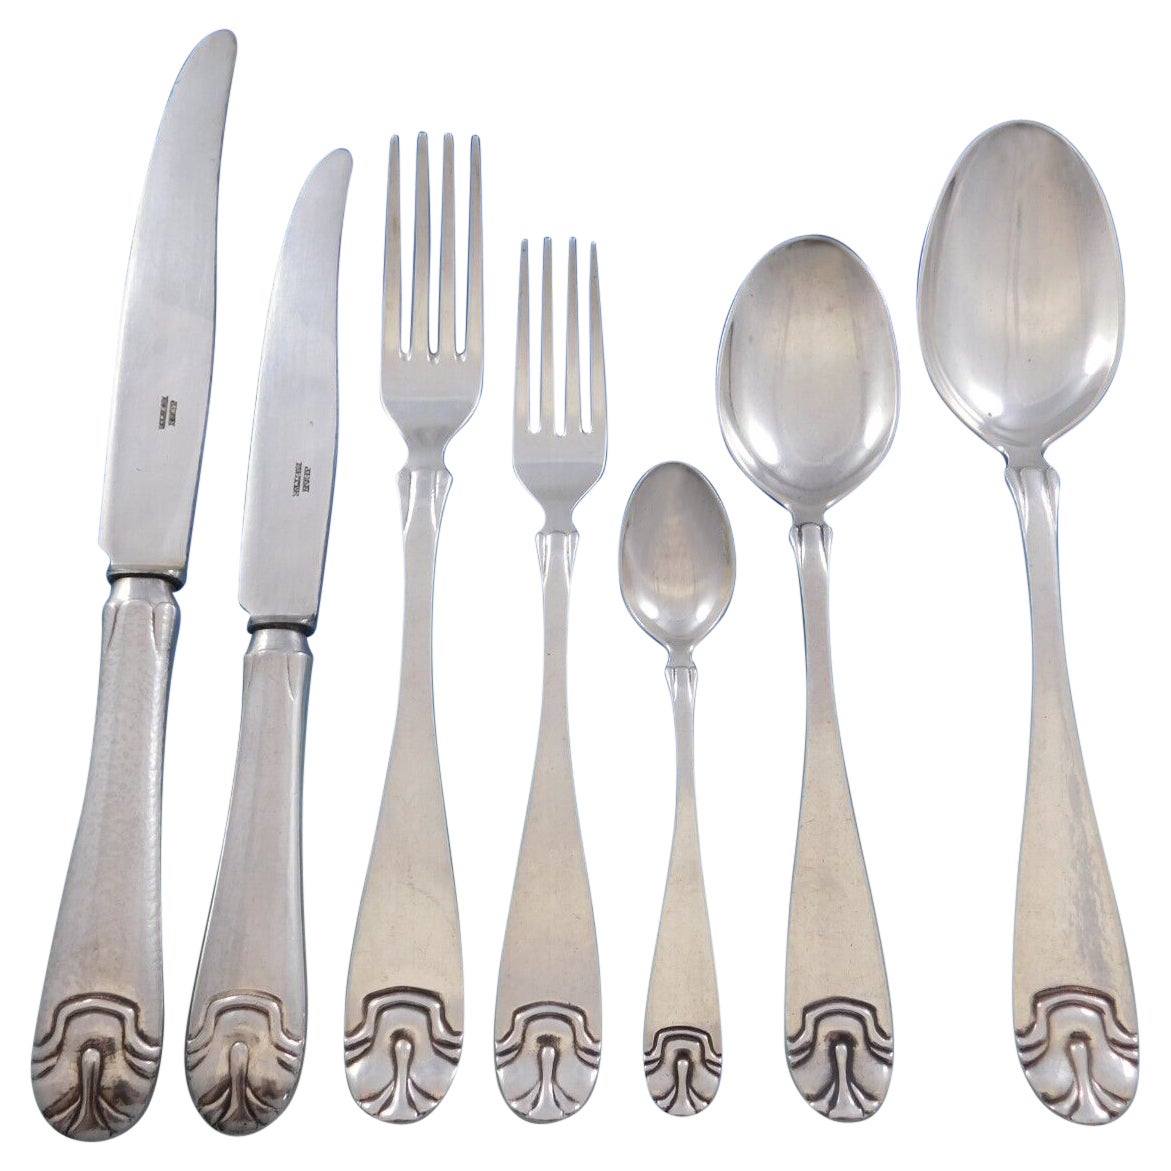 Hammered Shell Hamret Skjell by J Tostrup Norway 830 Silver Flatware Set Service For Sale